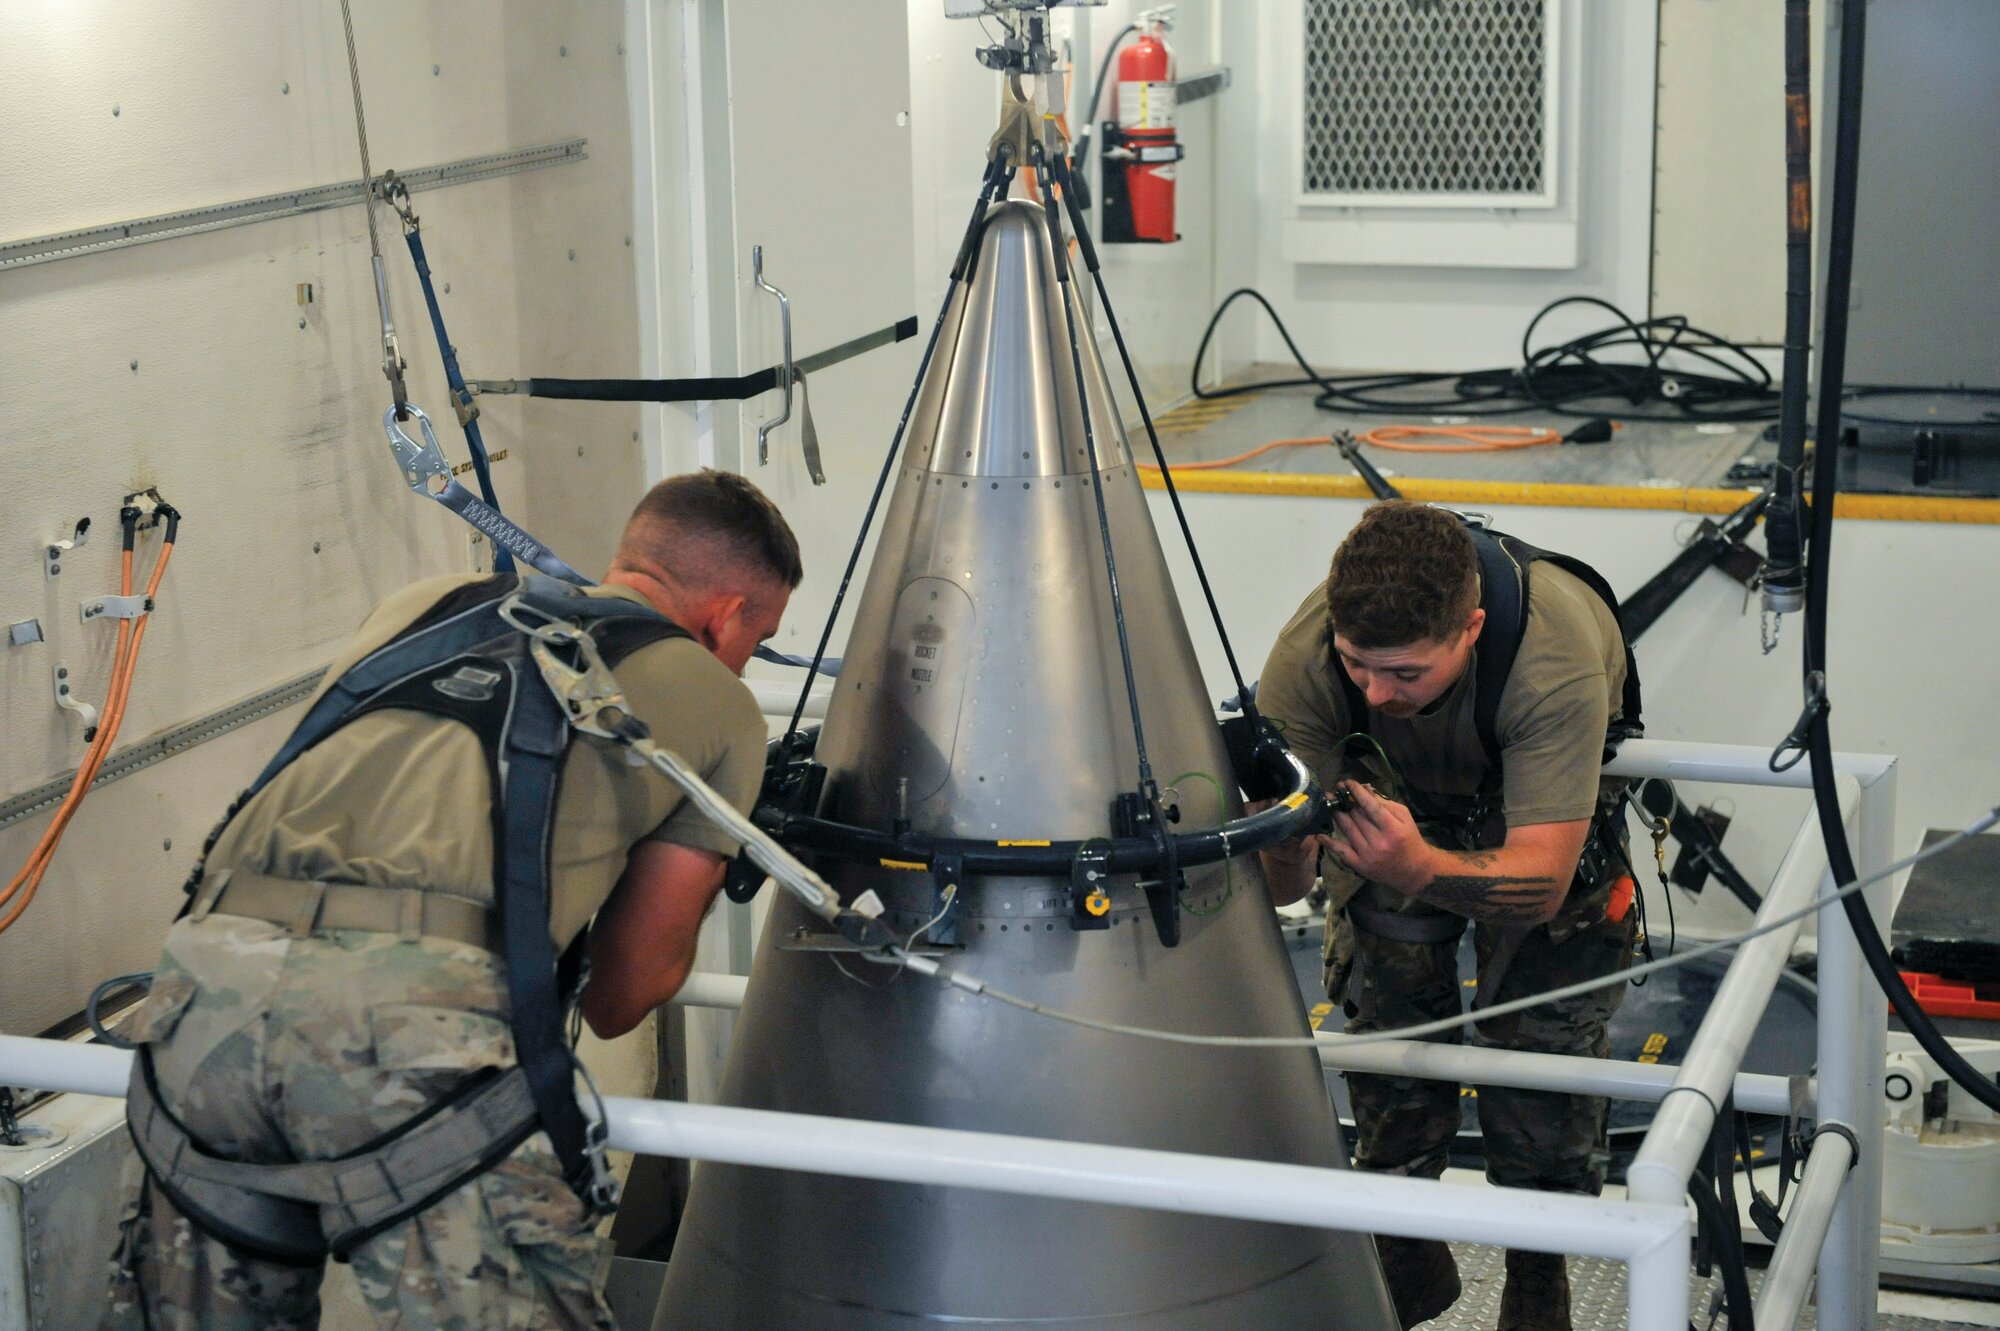 U.S. Air Force Senior Airman Jacob Deas, 23, left, and Airman 1st Class Jonathan Marrs, 21, right, secure the titanium shroud at the top of a Minuteman III intercontinental ballistic missile on Aug. 24, 2023, at the Bravo 9 silo at Malmstrom Air Force Base in Montana. After the shroud is secured, it is lifted off, revealing the black cone-shaped nuclear warhead inside.